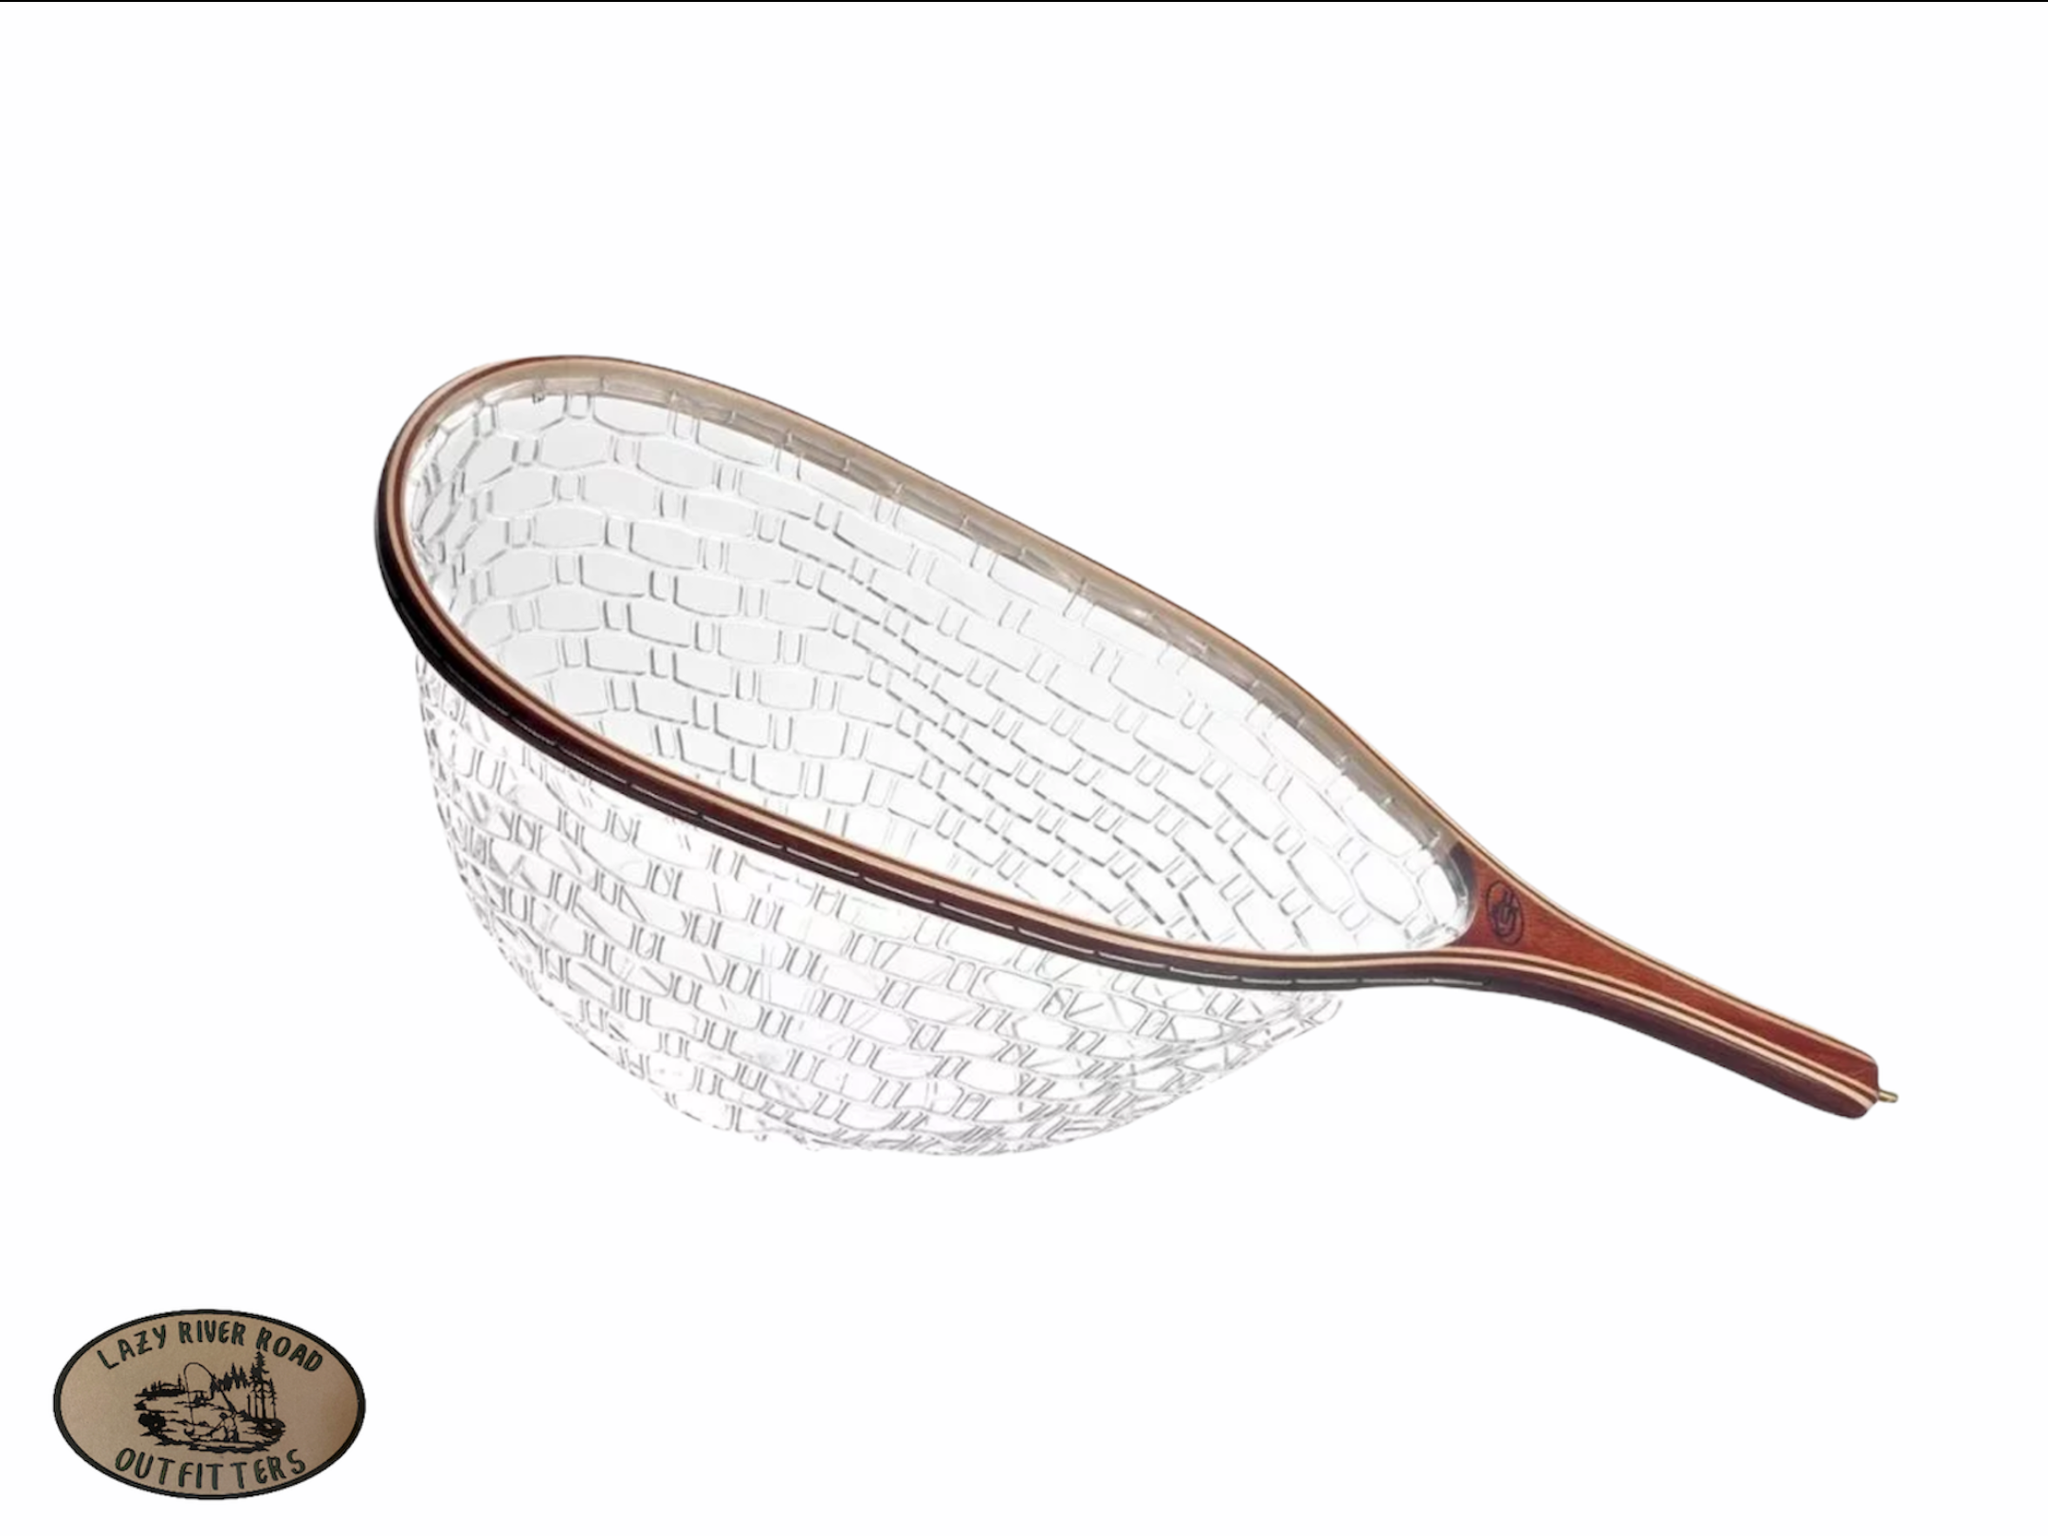 Net w/clear catch and release net – Lazy river road outfitters